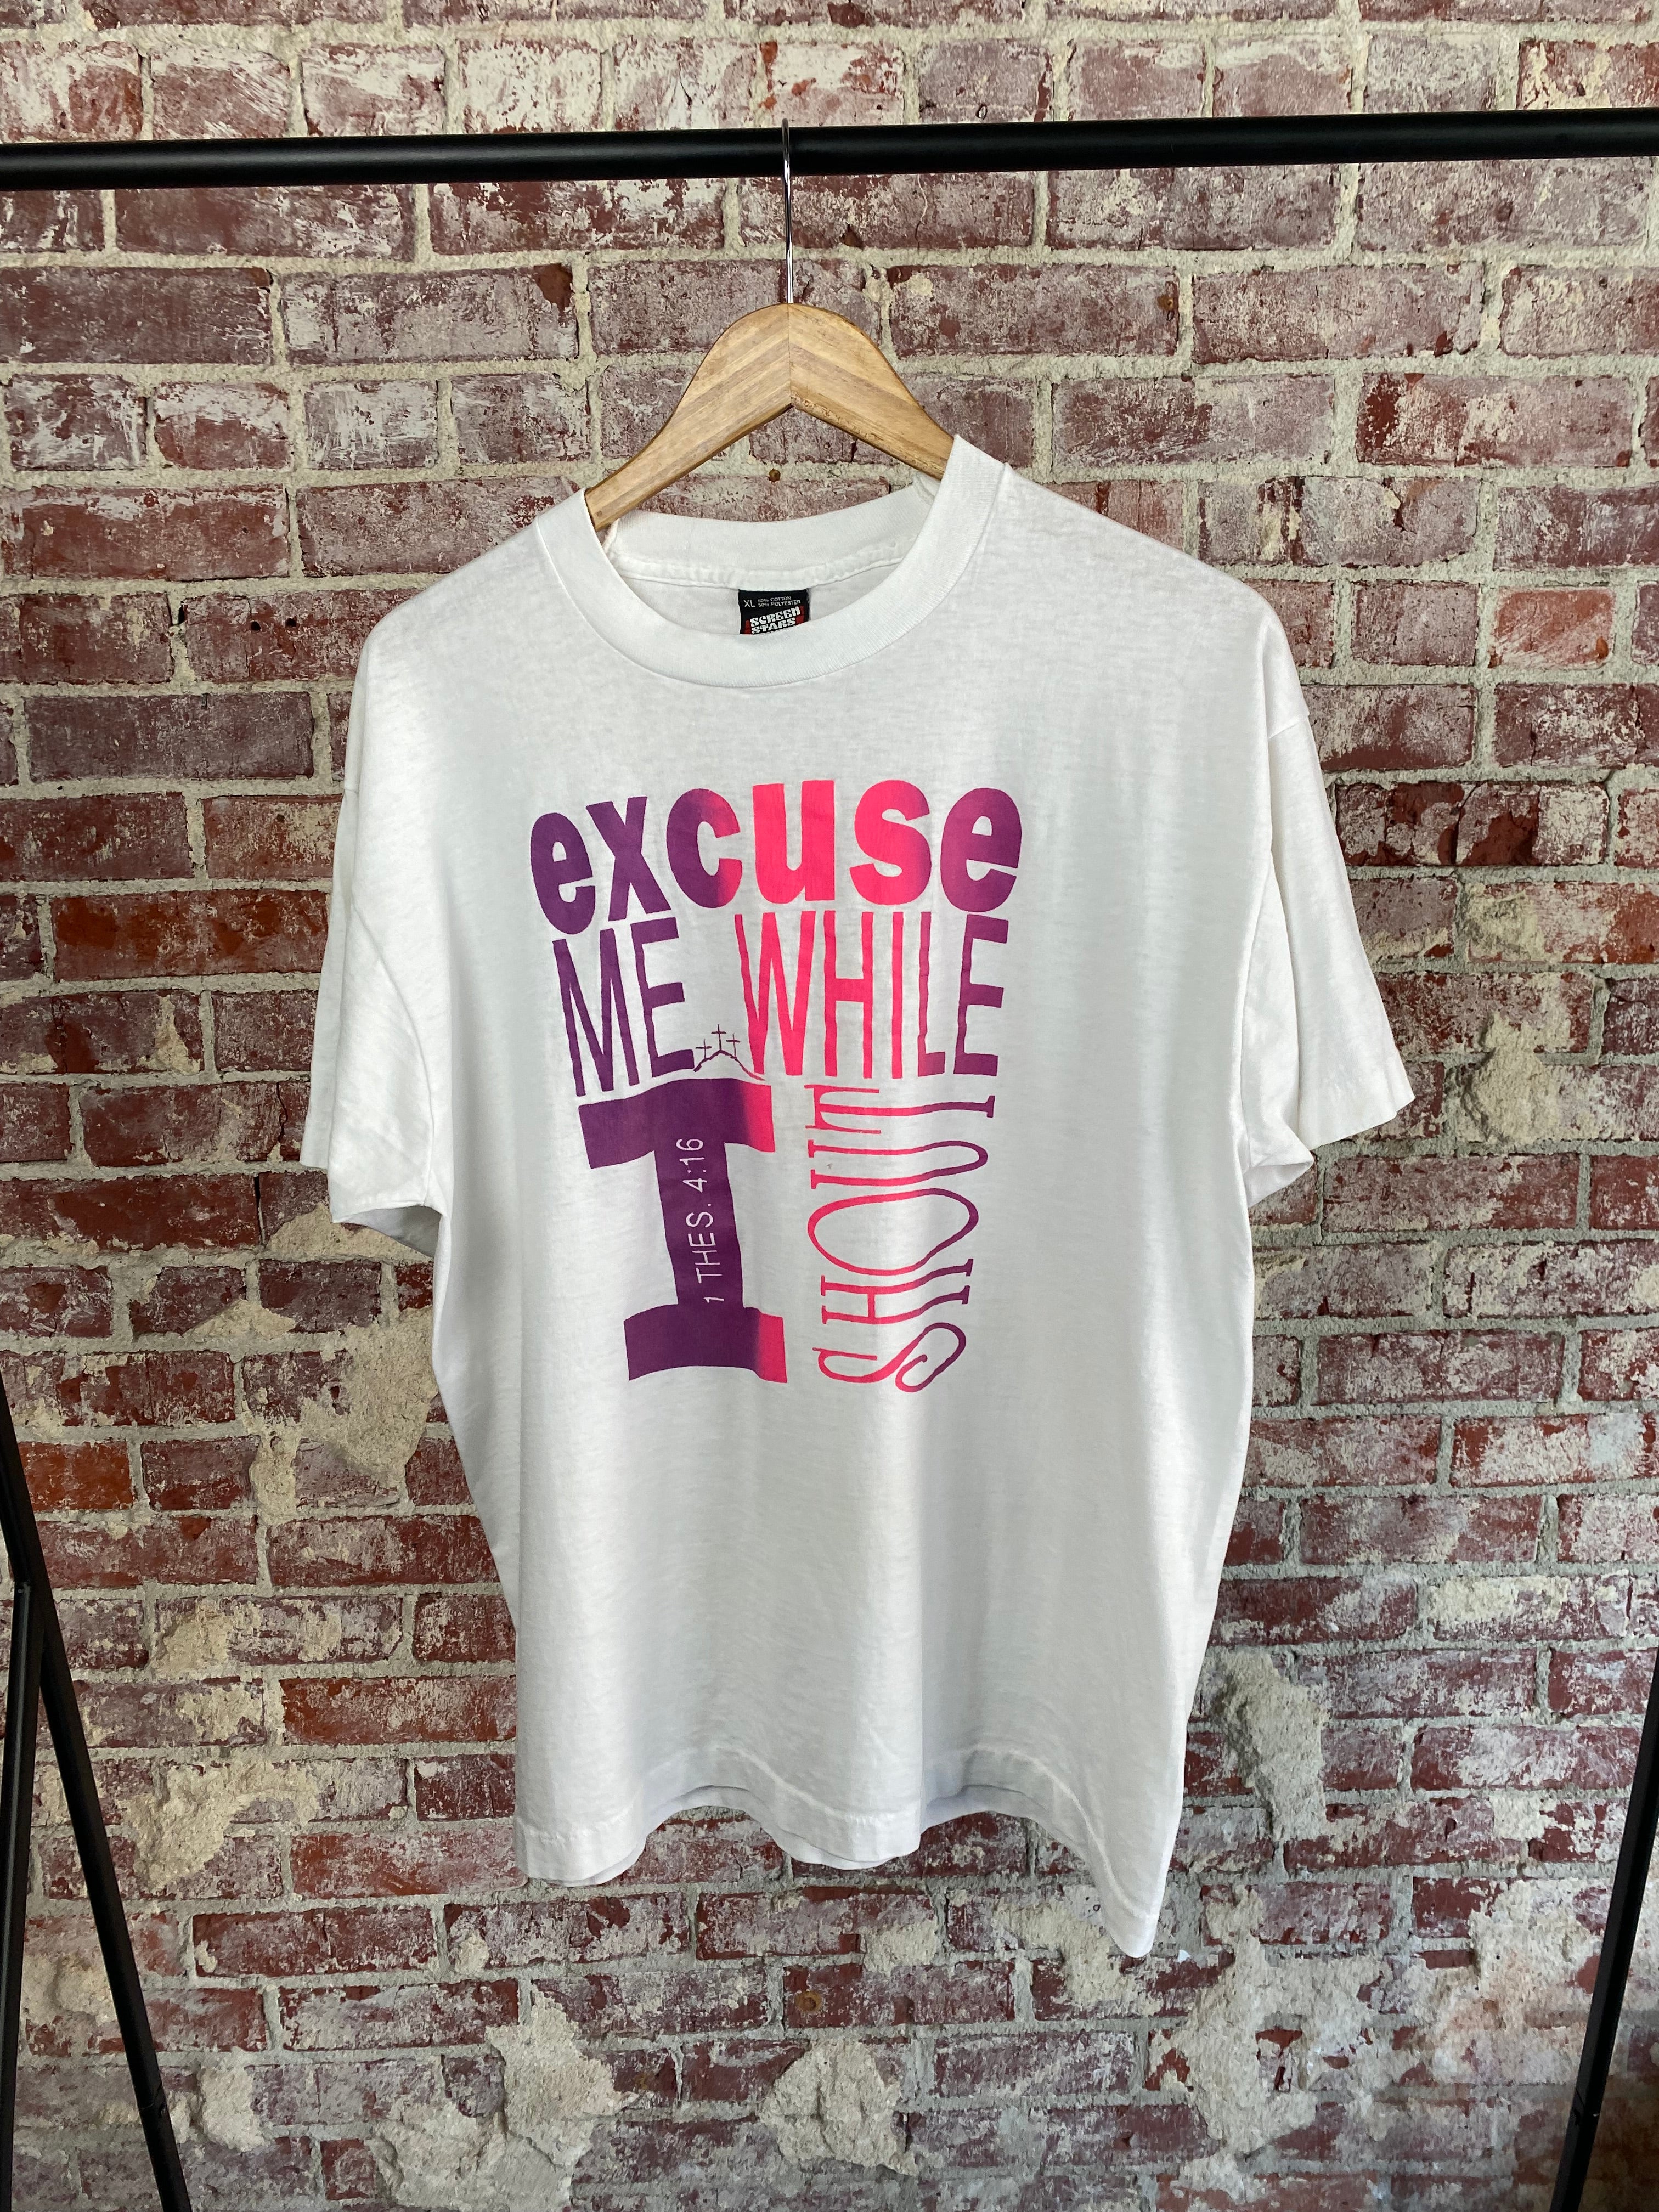 Vintage Excuse Me While I Shout tee